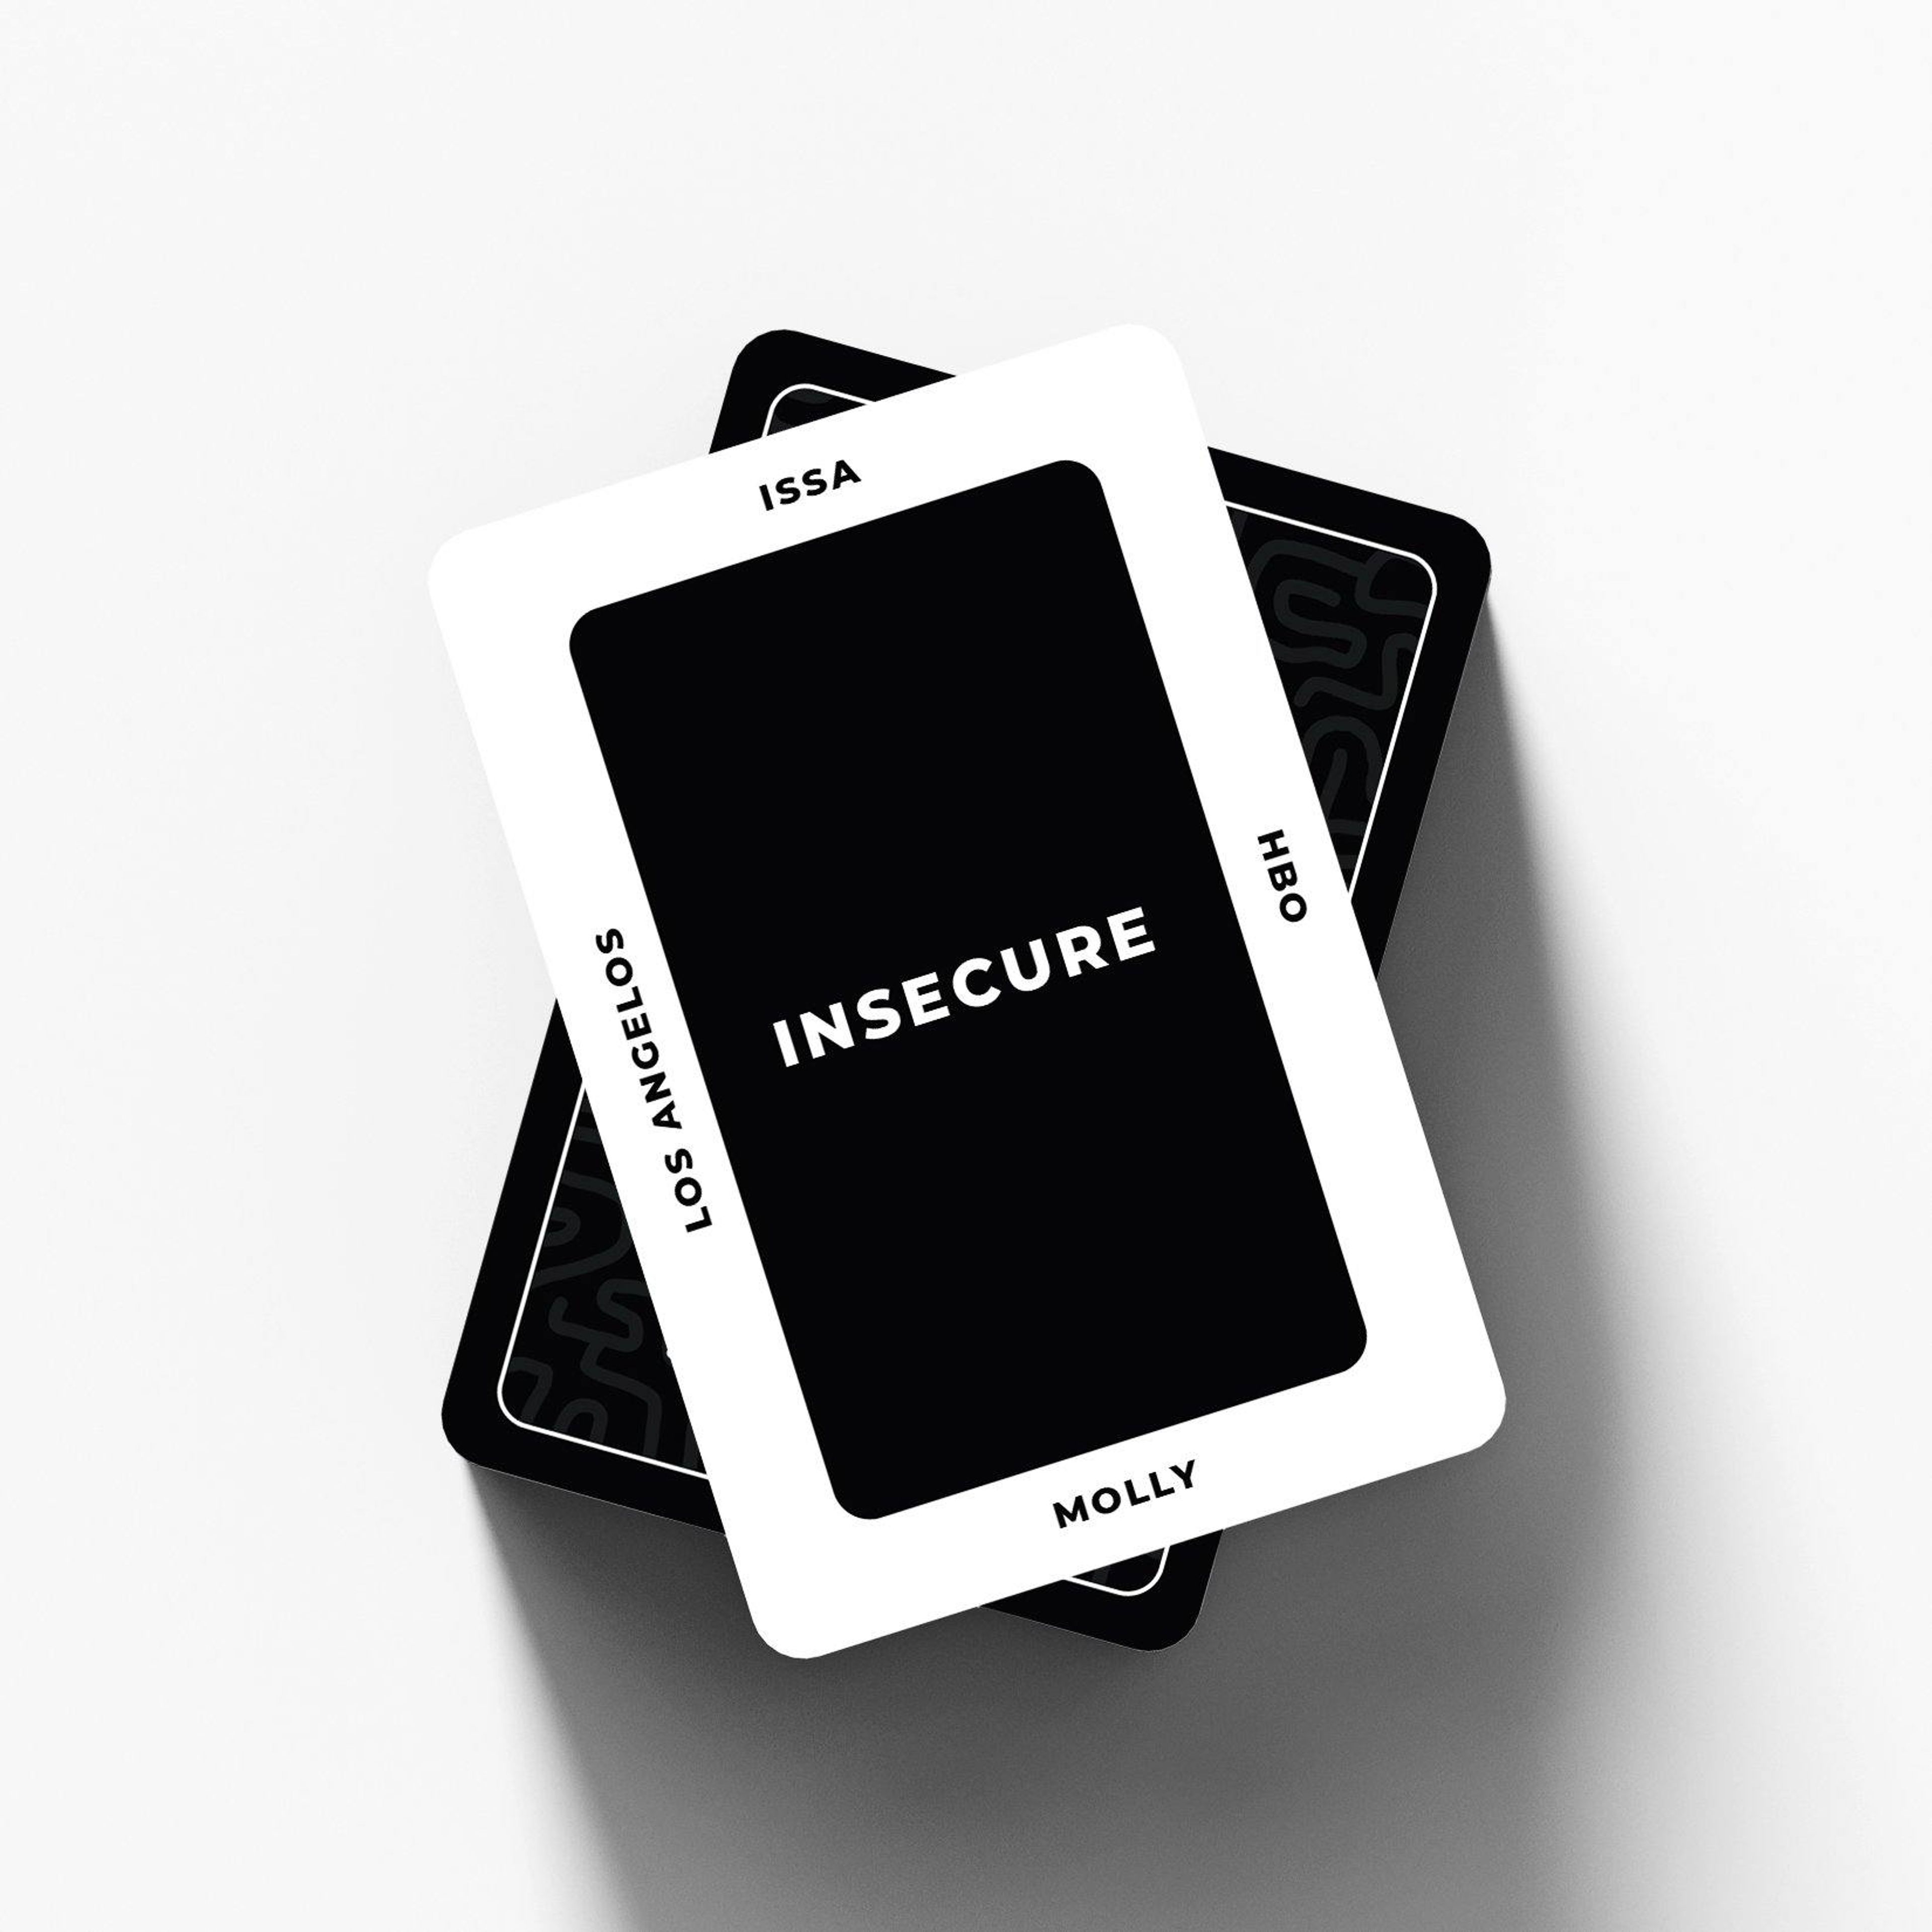 Out of Bounds - Black Taboo Card Game